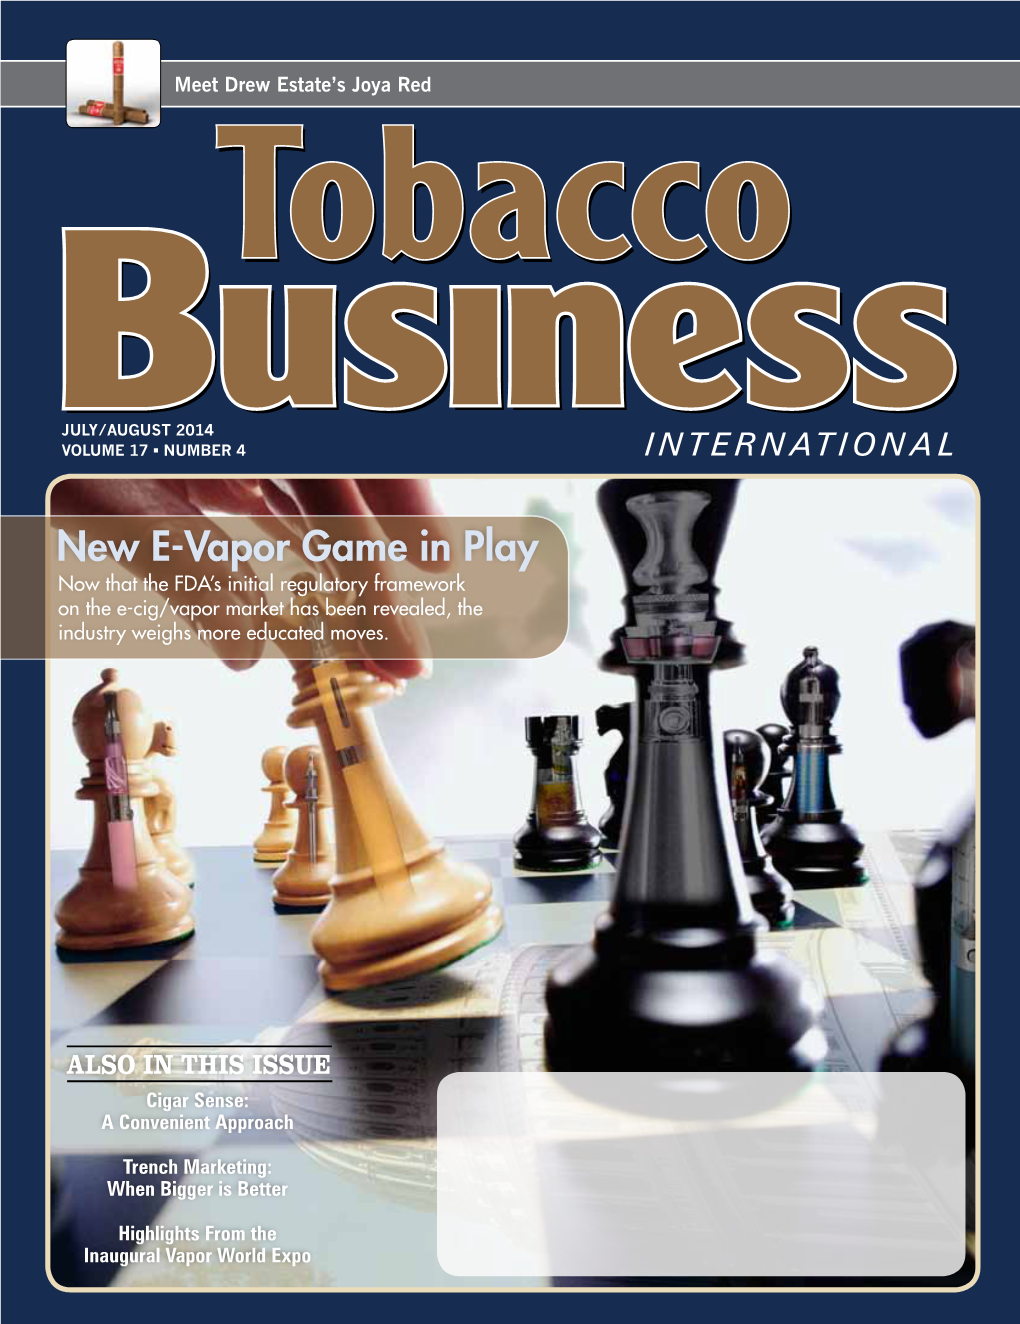 New E-Vapor Game in Play Now That the FDA’S Initial Regulatory Framework on the E-Cig/Vapor Market Has Been Revealed, the Industry Weighs More Educated Moves